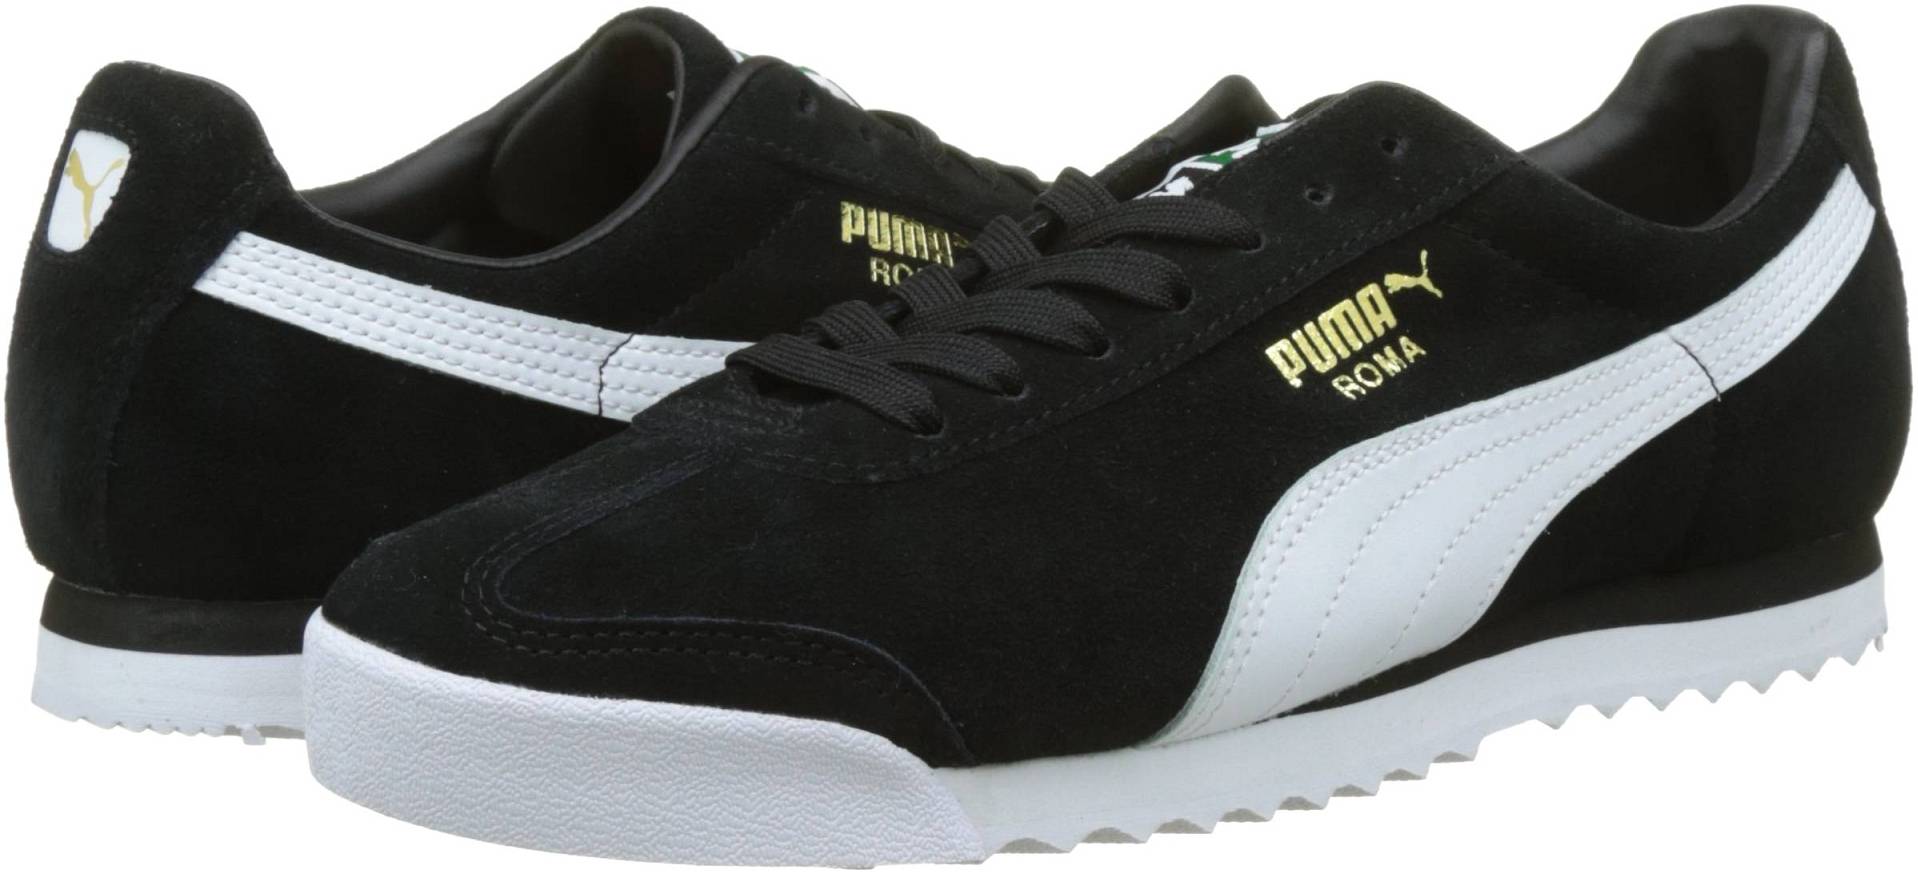 Puma Roma Suede – Shoes Reviews & Reasons To Buy